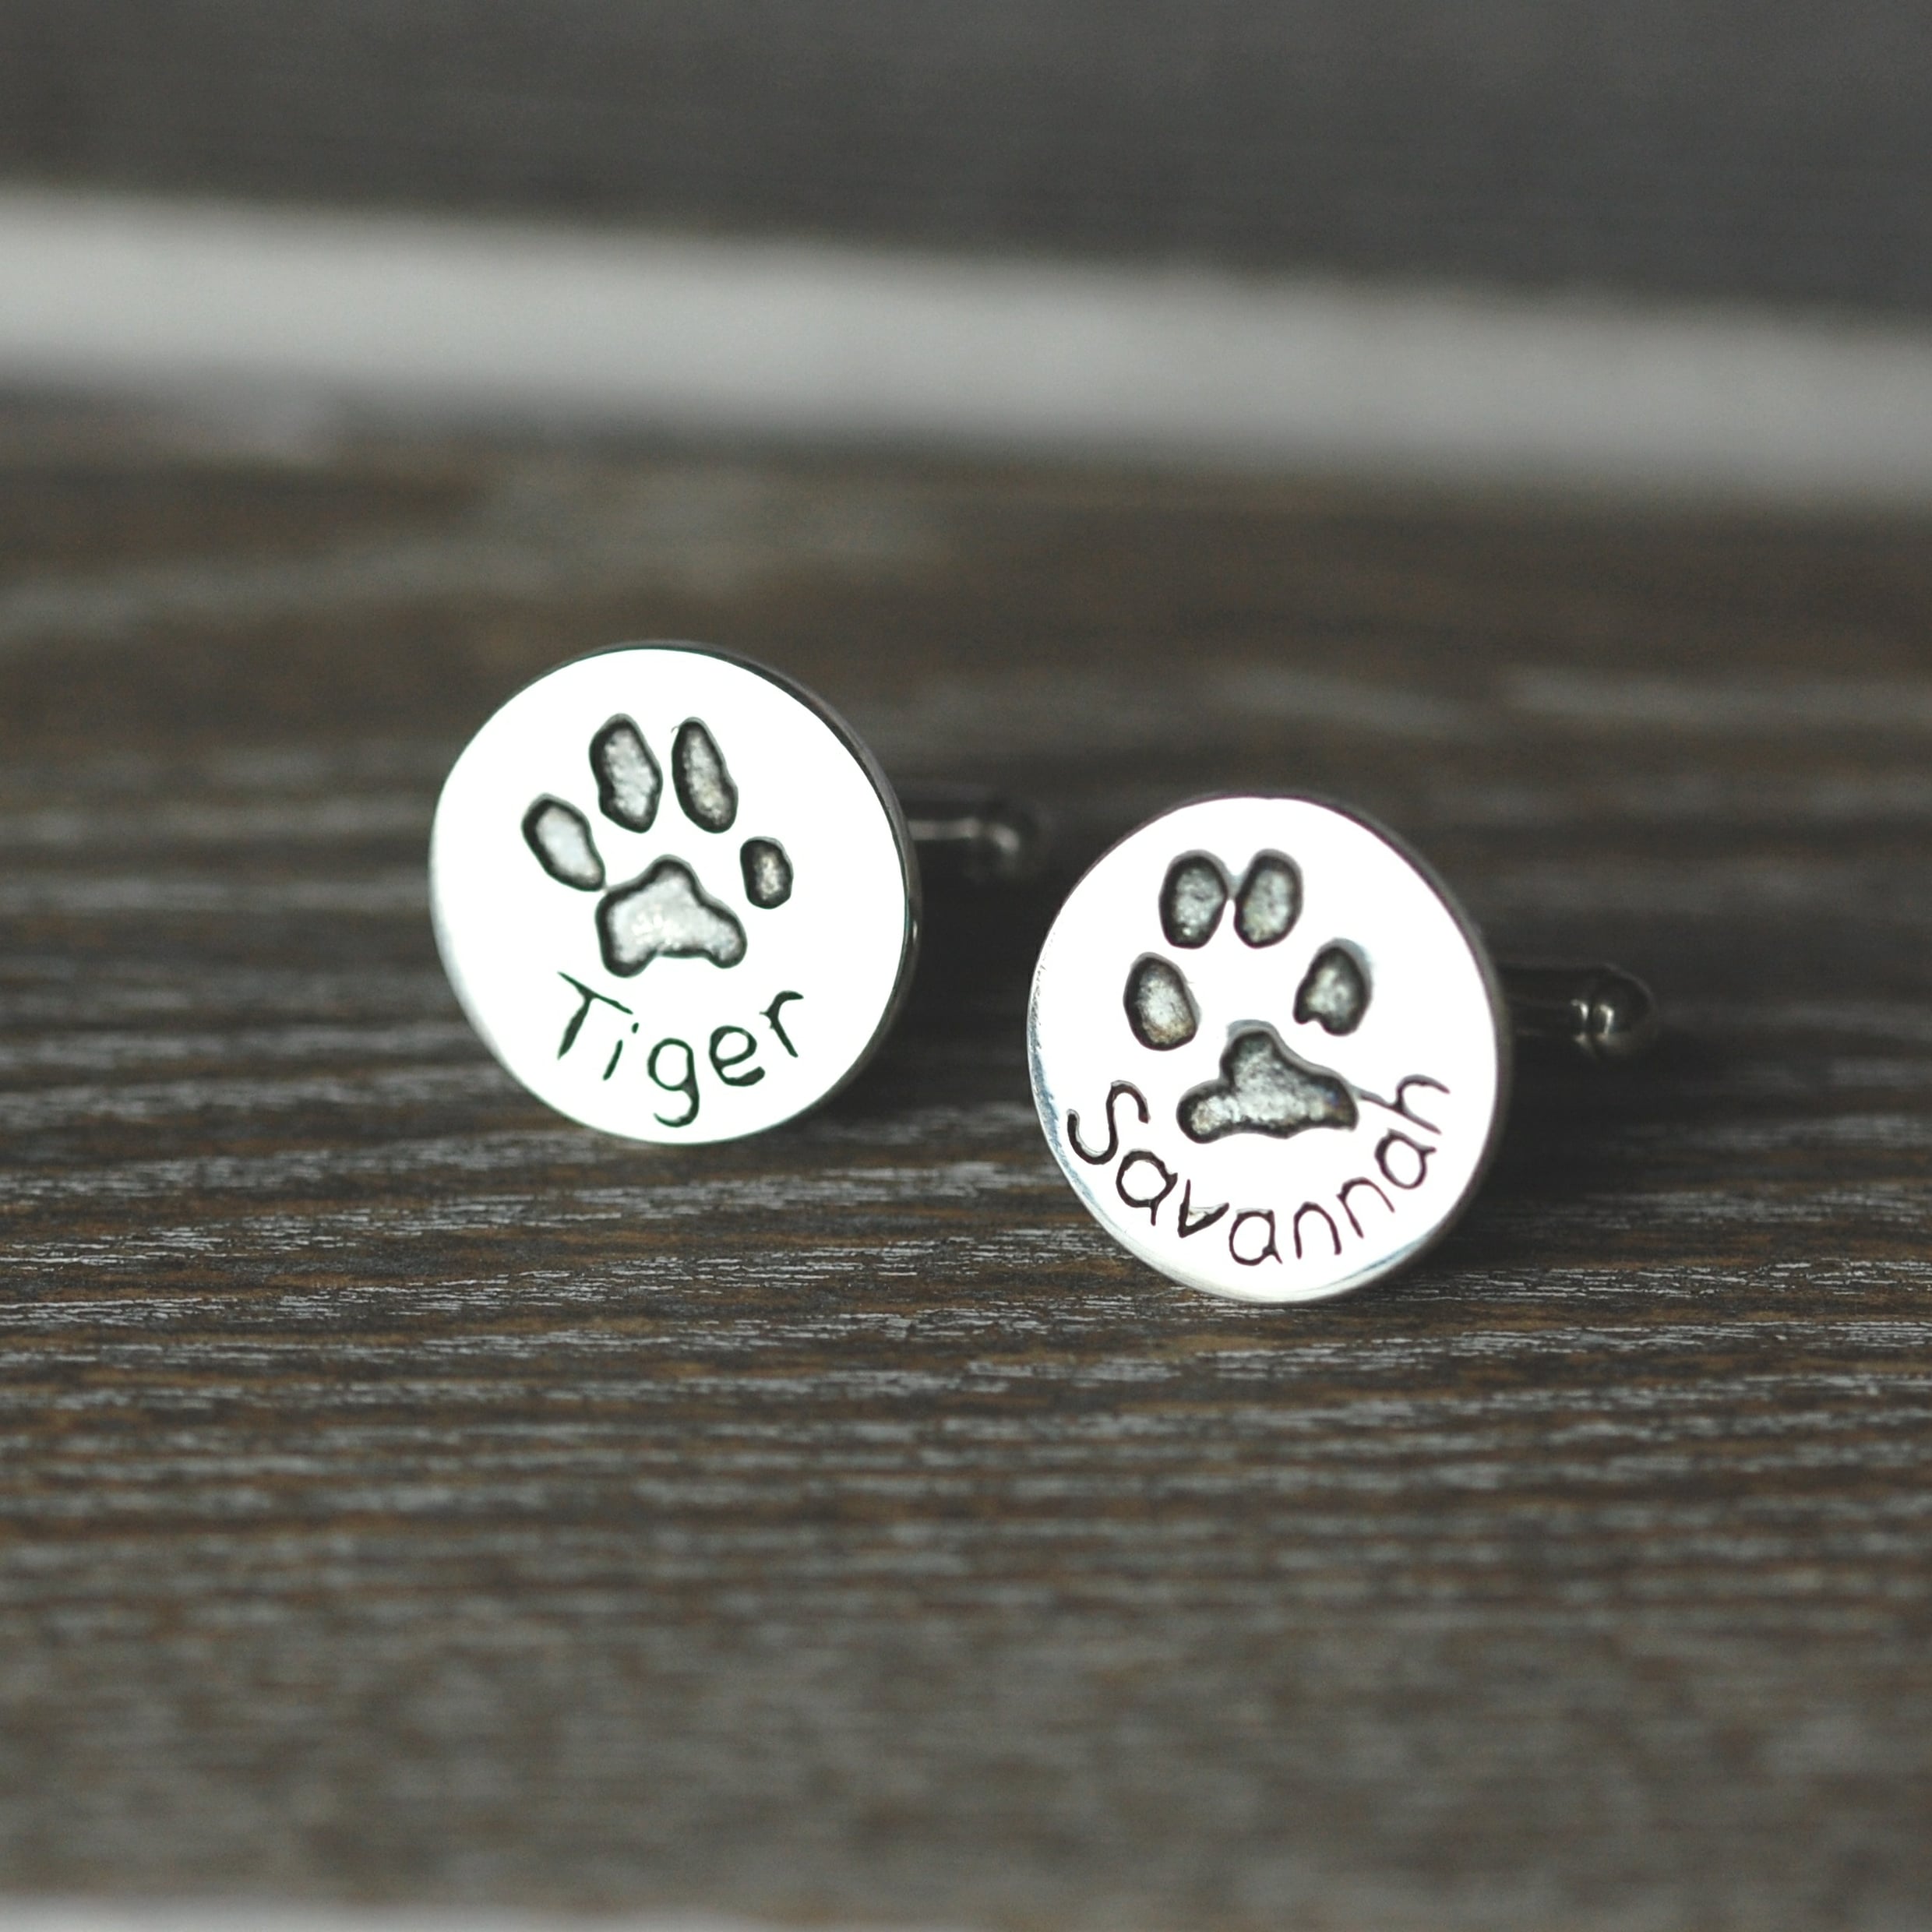 Sterling silver cufflinks showcasing your pet's paw prints and names